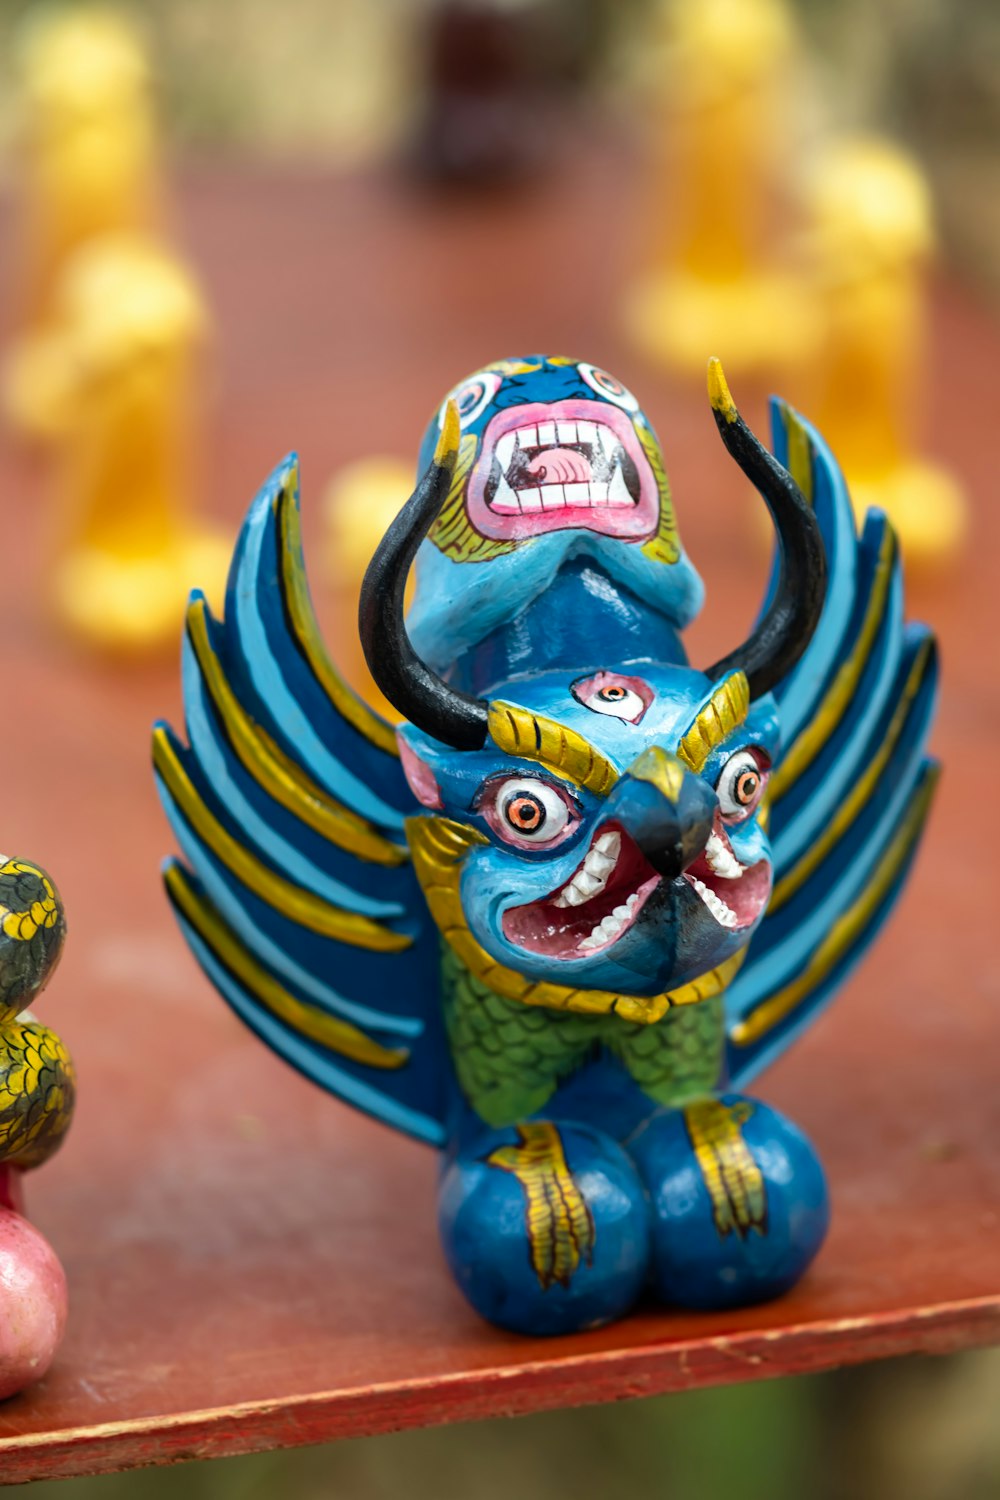 blue yellow and red dragon figurine